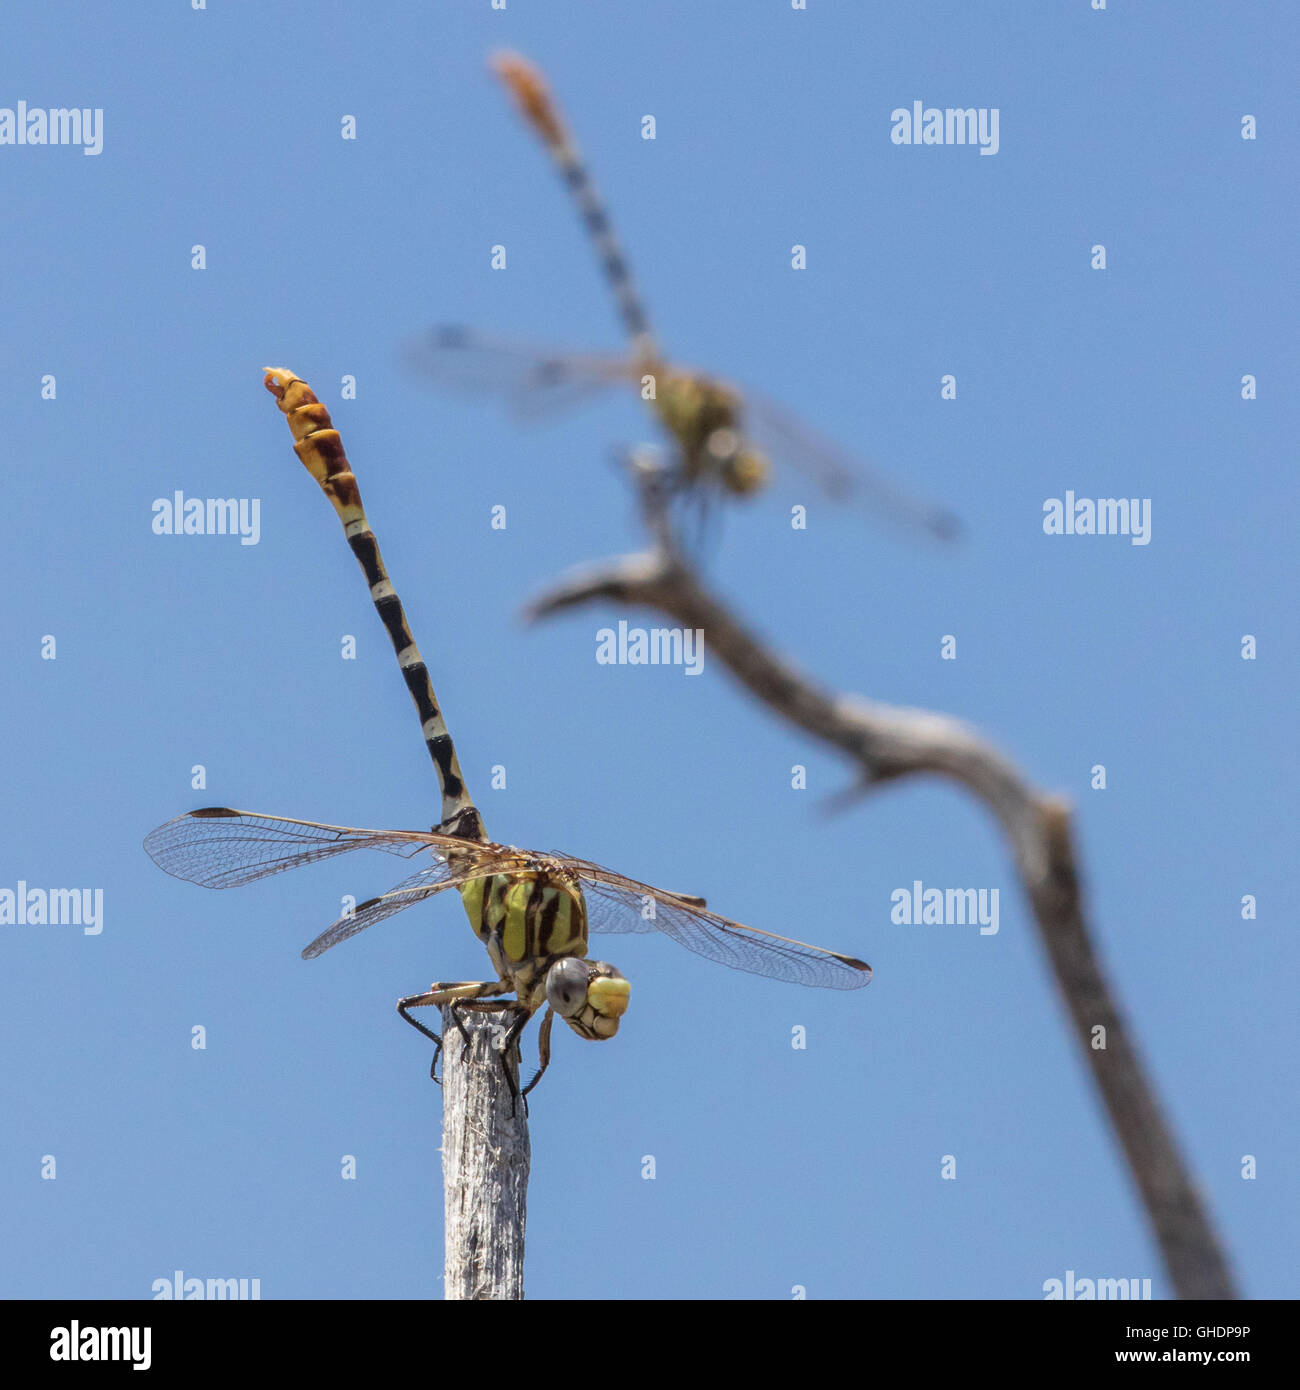 A pair of male Eastern Ringtails, Erpetogomphus designatus, mirror poses as they obelisk to avoid the heat of the midday sun. Stock Photo